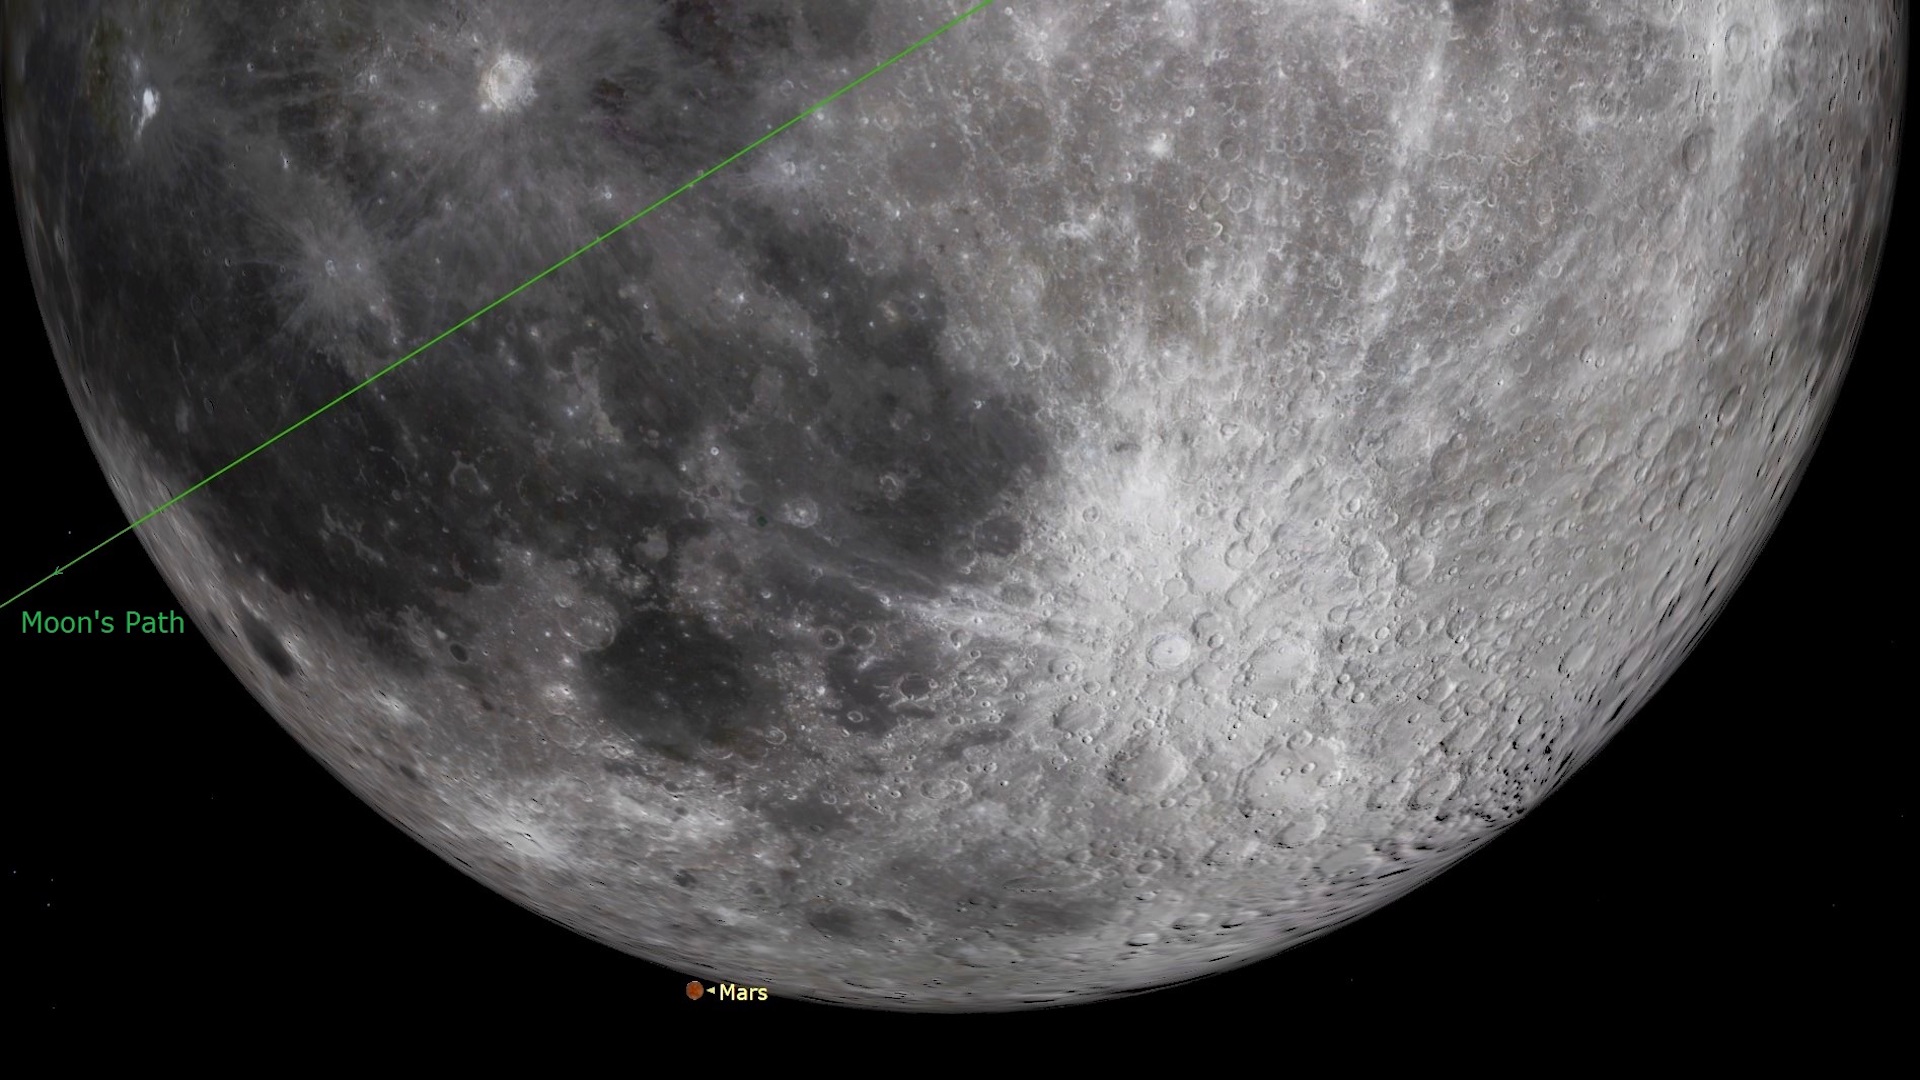 An illustration of the full Cold Moon as it appears on December 7, with Mars visible behind it.